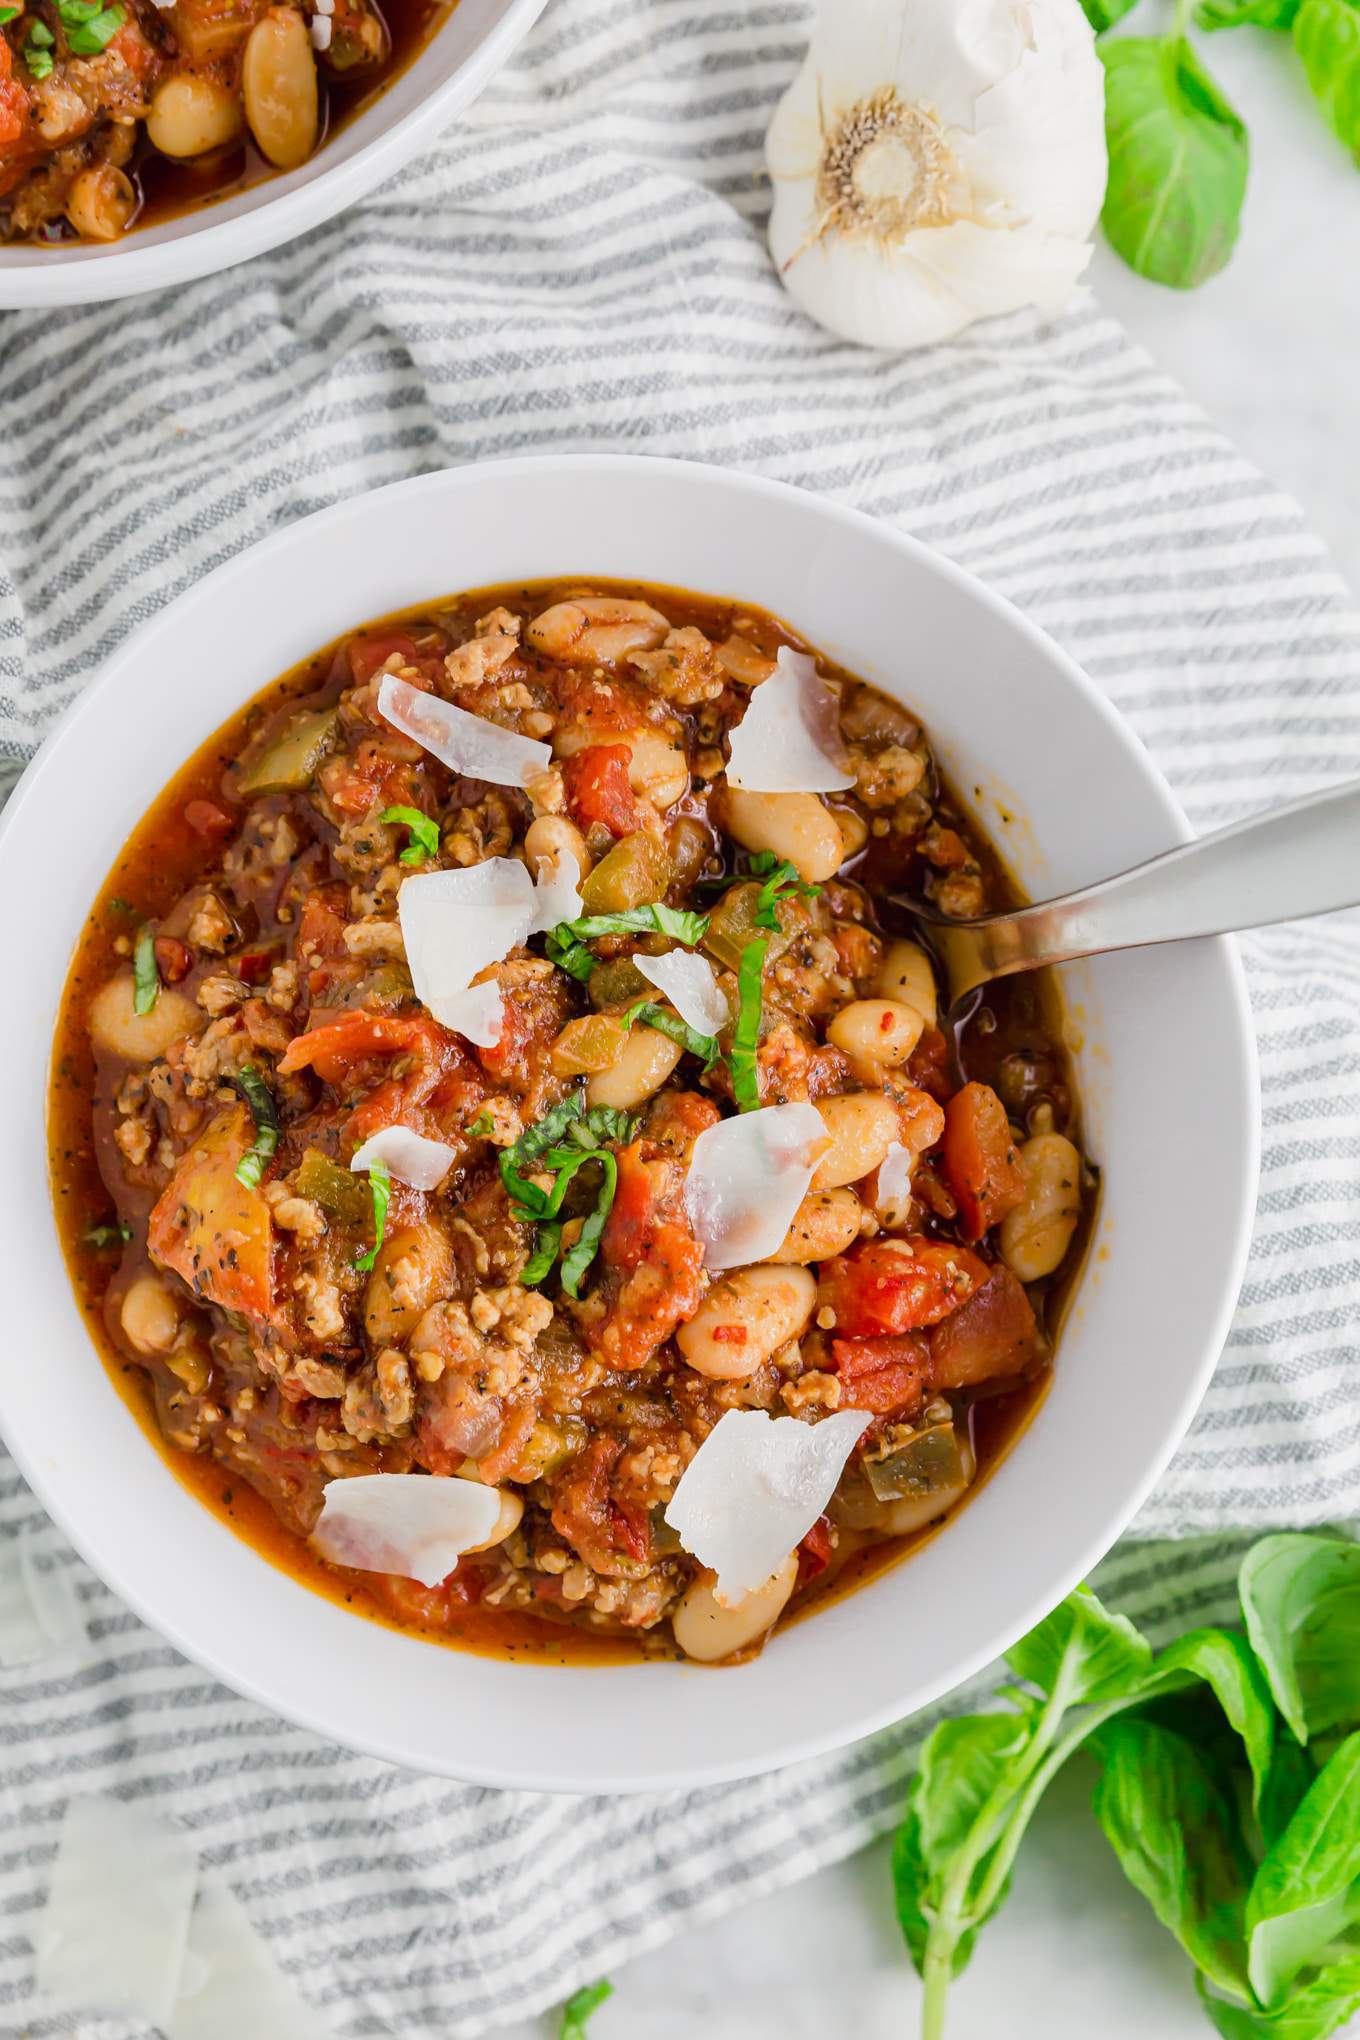 A zesty bowl of chili with flavorful ground sausage, tomatoes and basil.